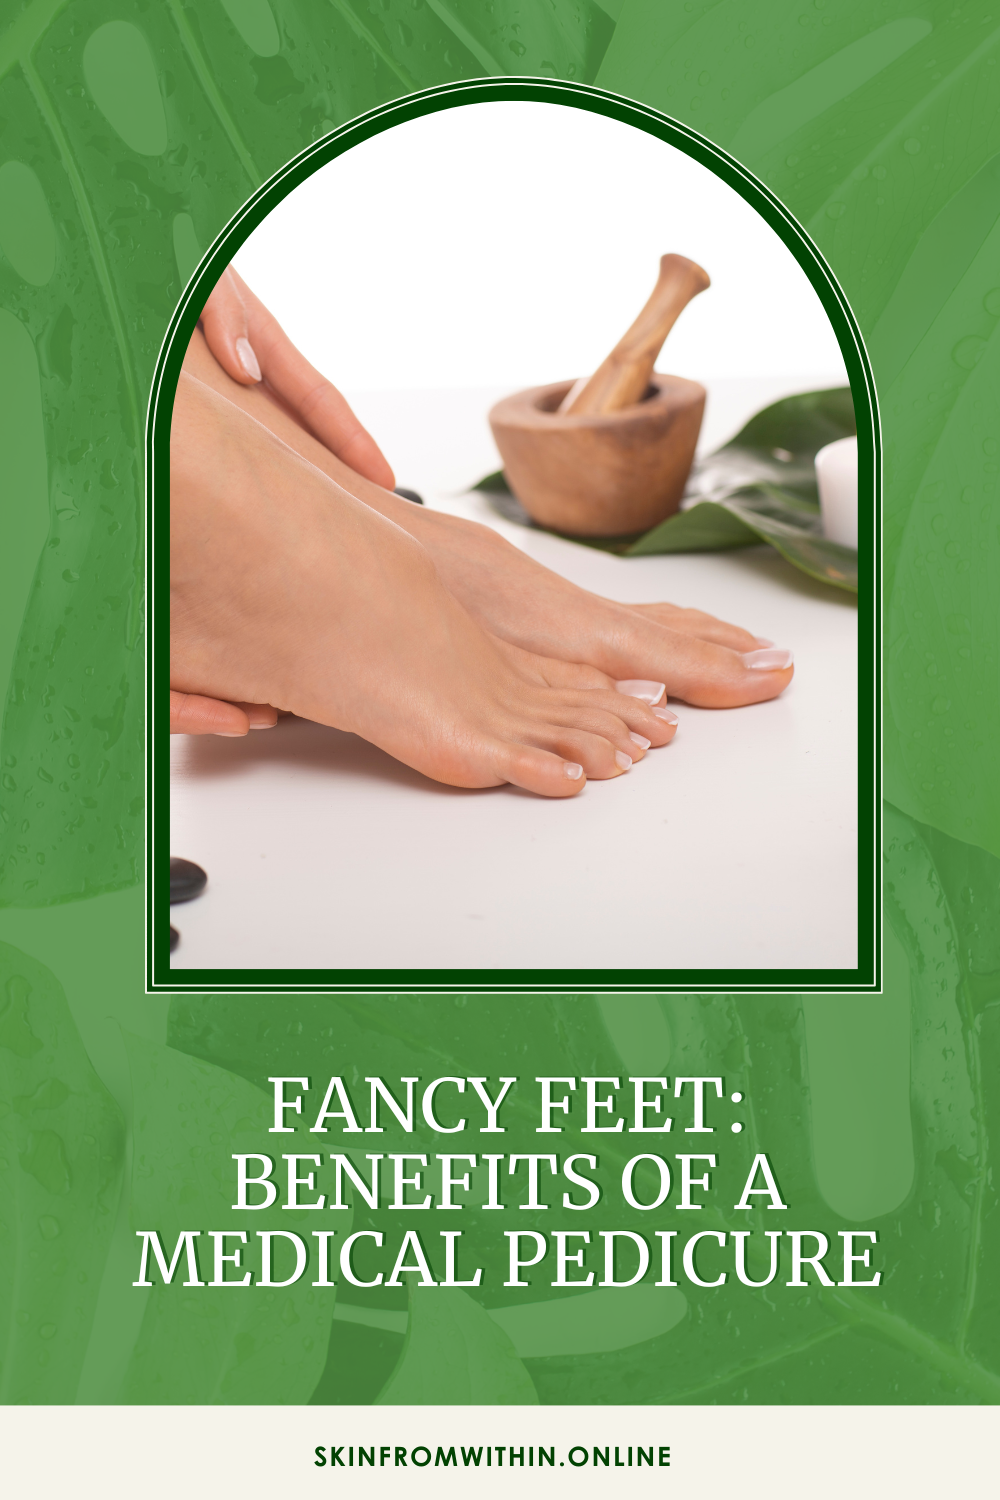 4 Health Benefits of Pedicures  How Often Should You Get a Pedicure